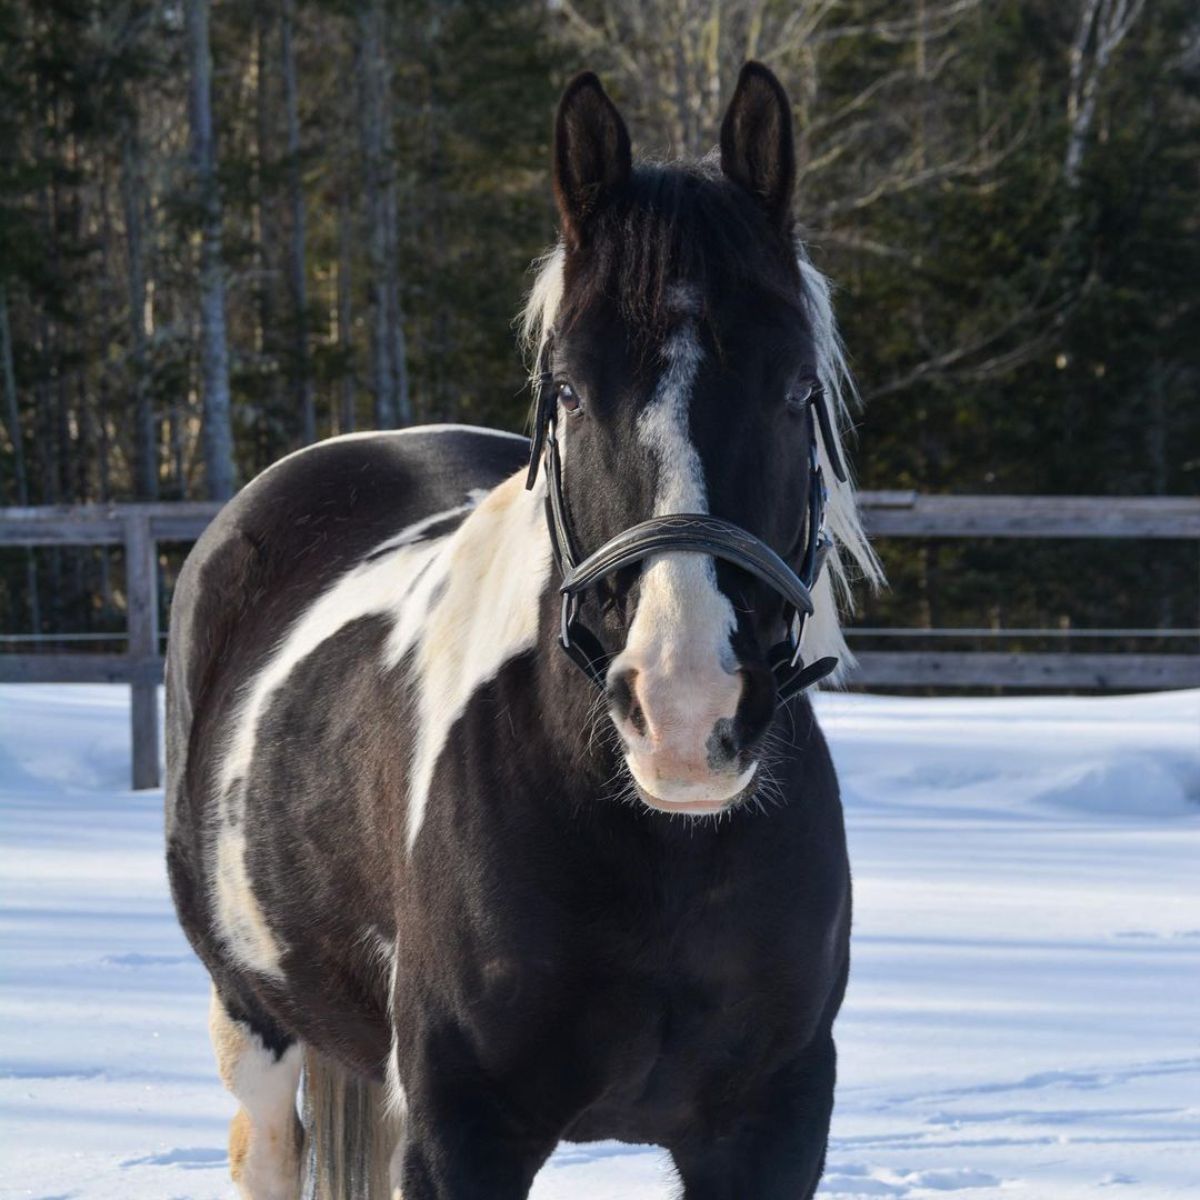 Spotted Saddle Horse stands on a snow-covered ground.